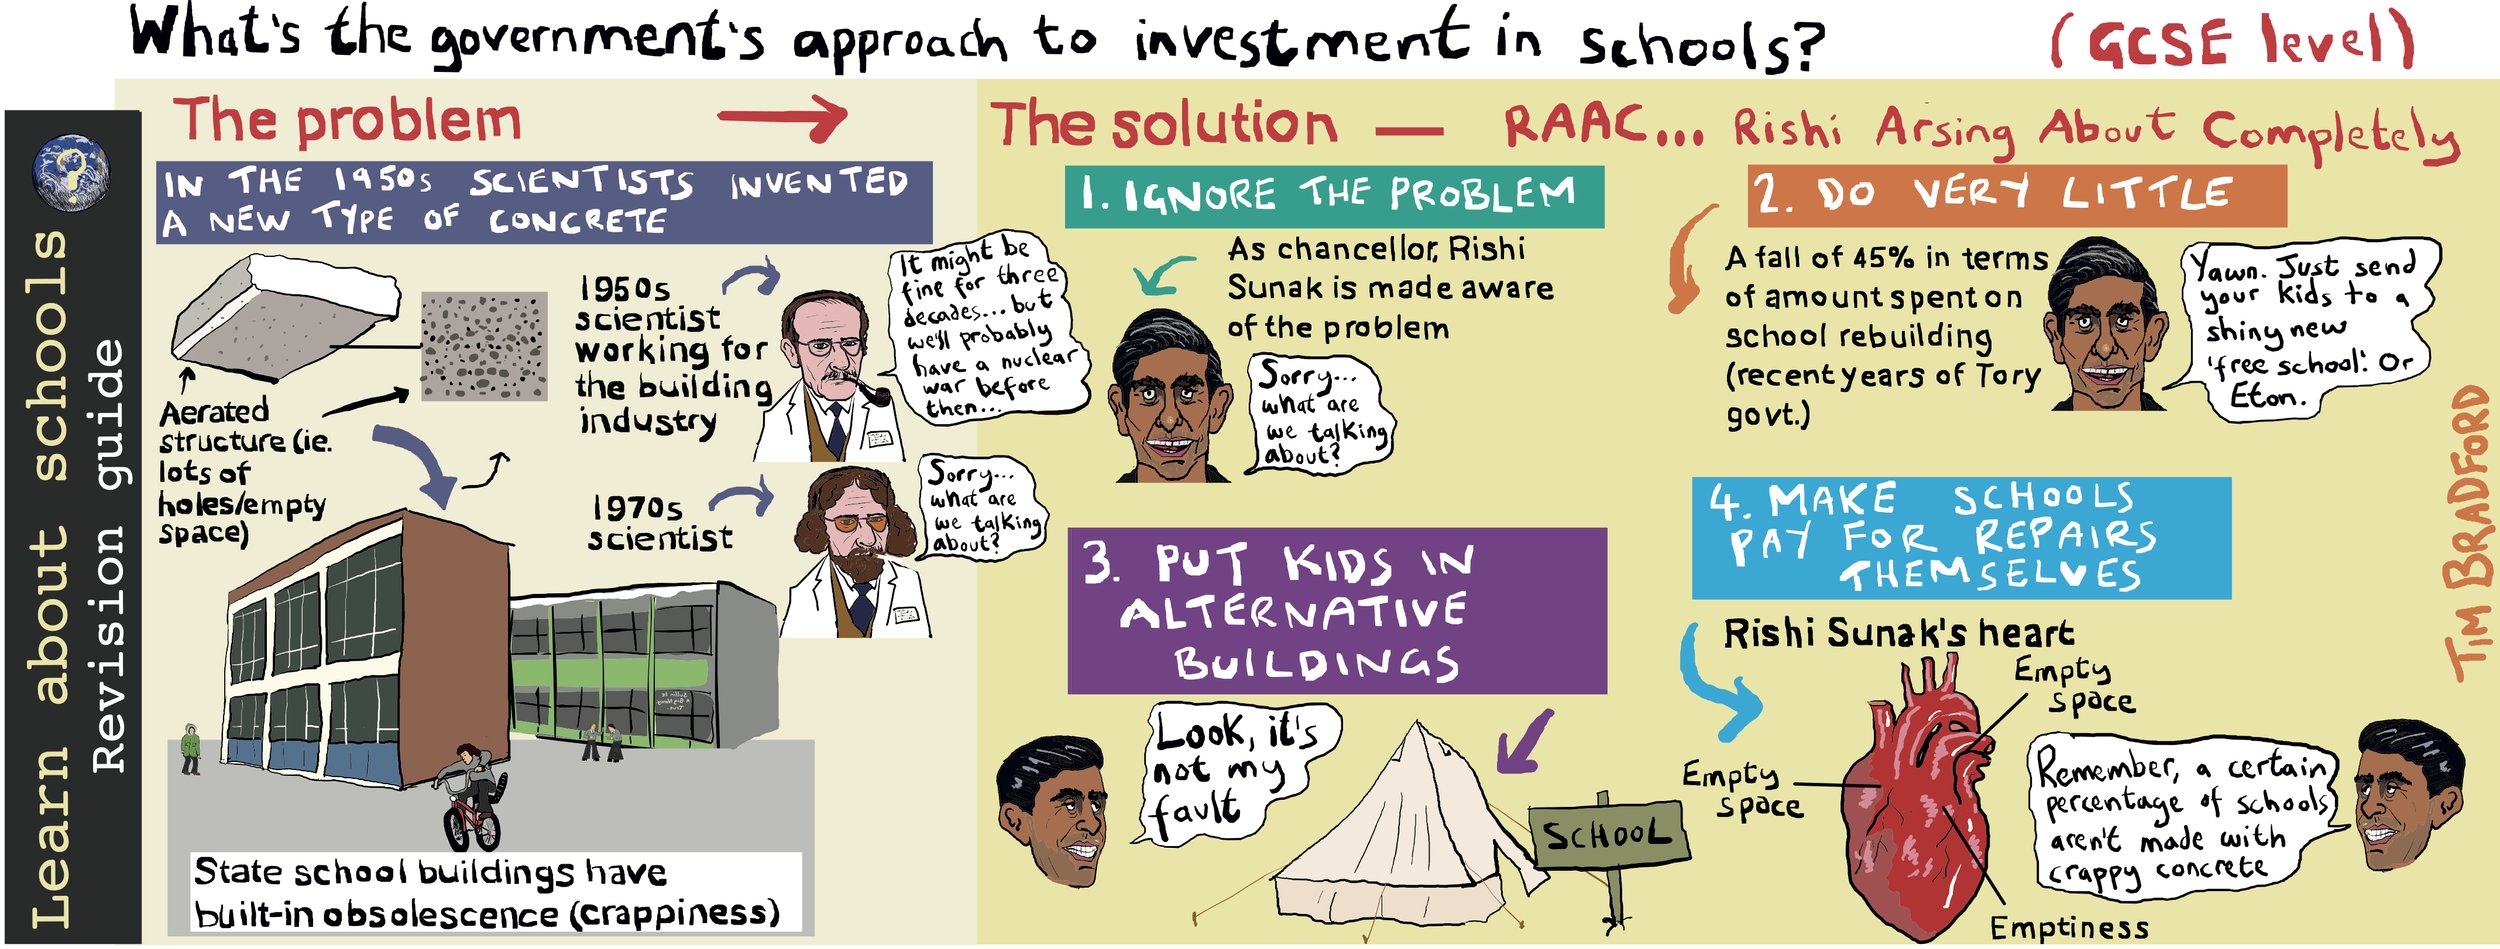 What's the govt.'s approach to investment in schools? - 03/09/2023